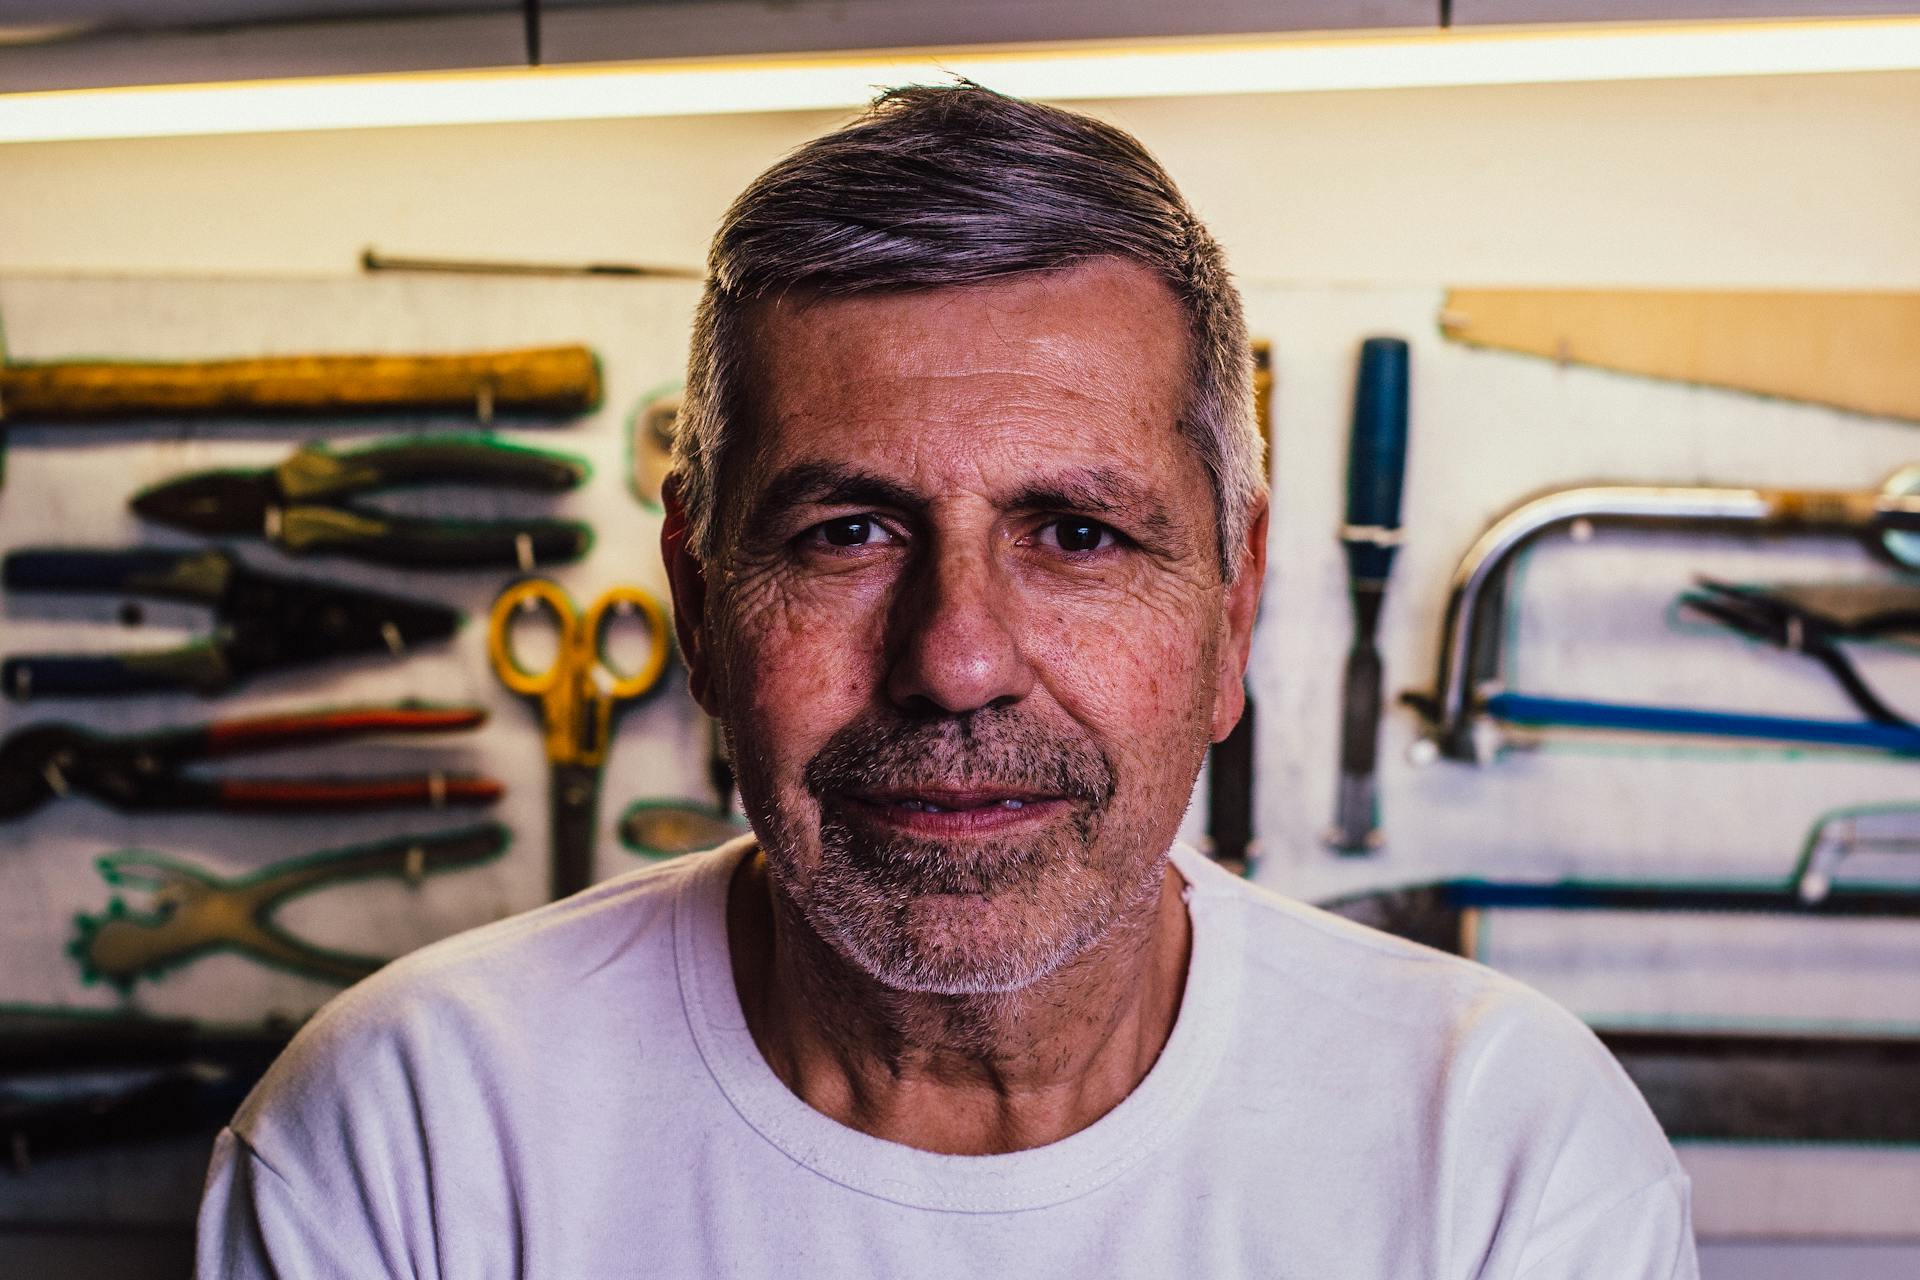 An elderly man with assorted hand tools in the background | Source: Pexels